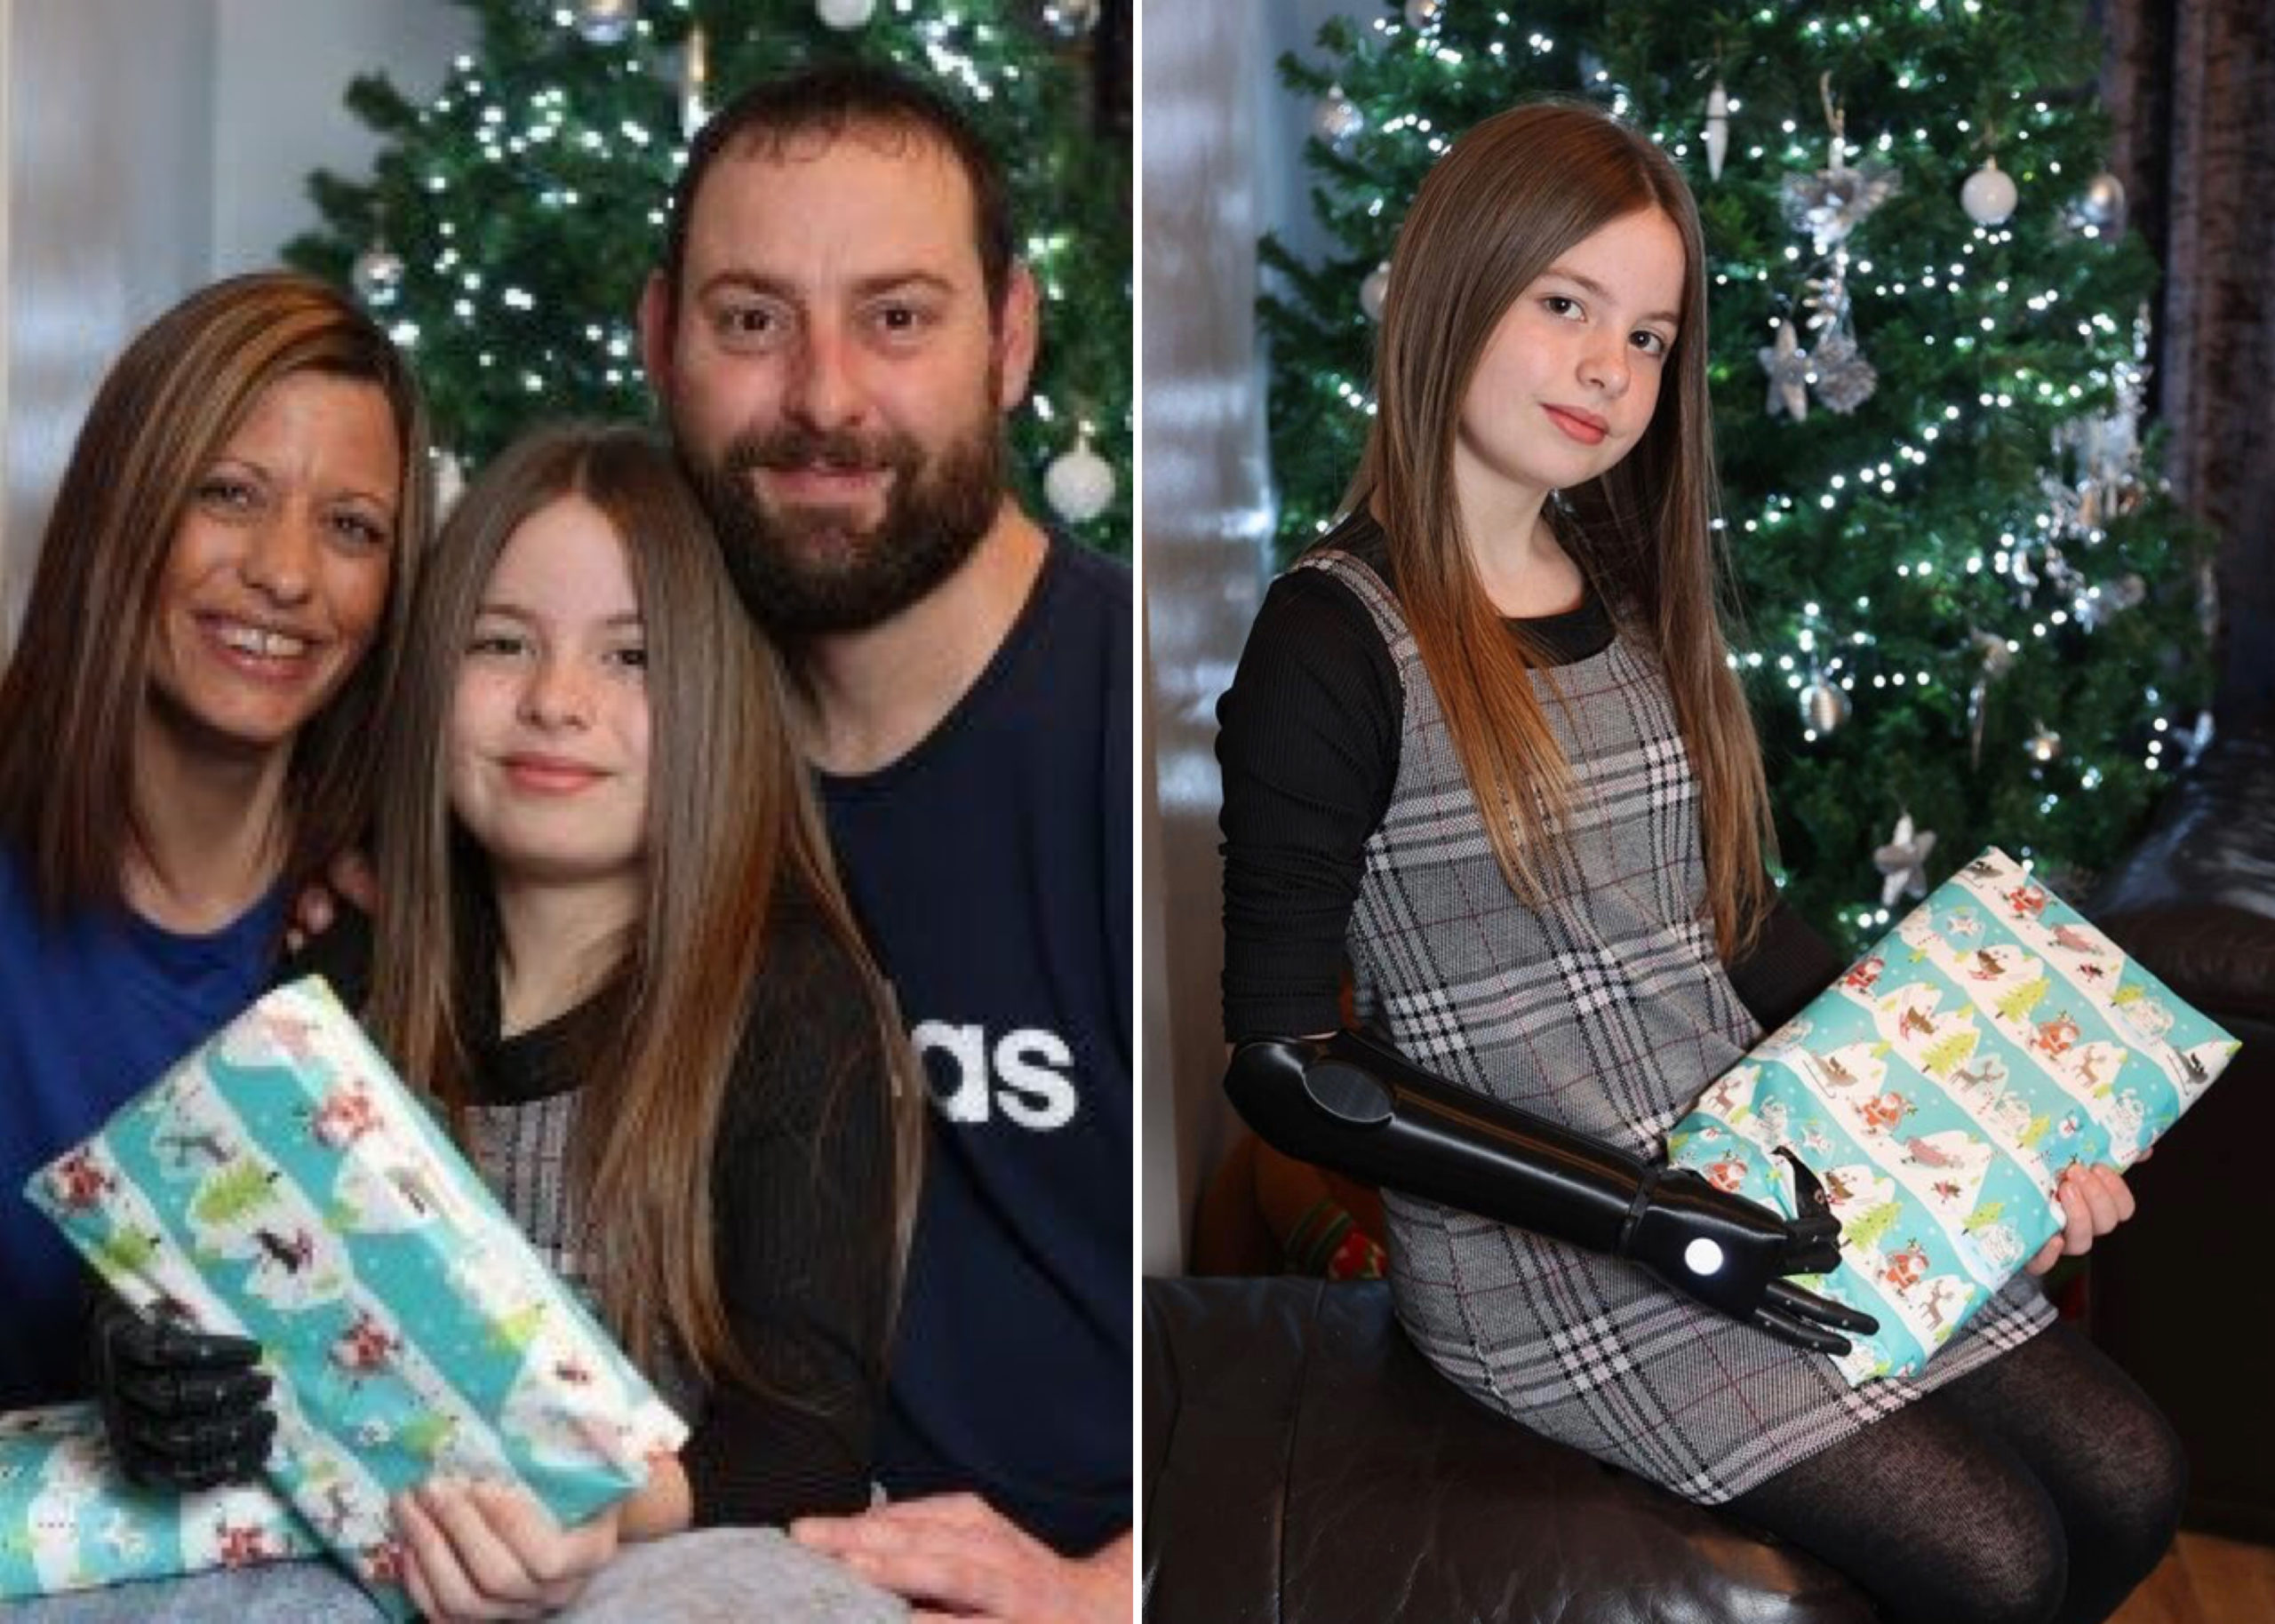 10-Year-Old Girl Born Without Right Hand Gets New Bionic Arm In Time To Open Christmas Presents